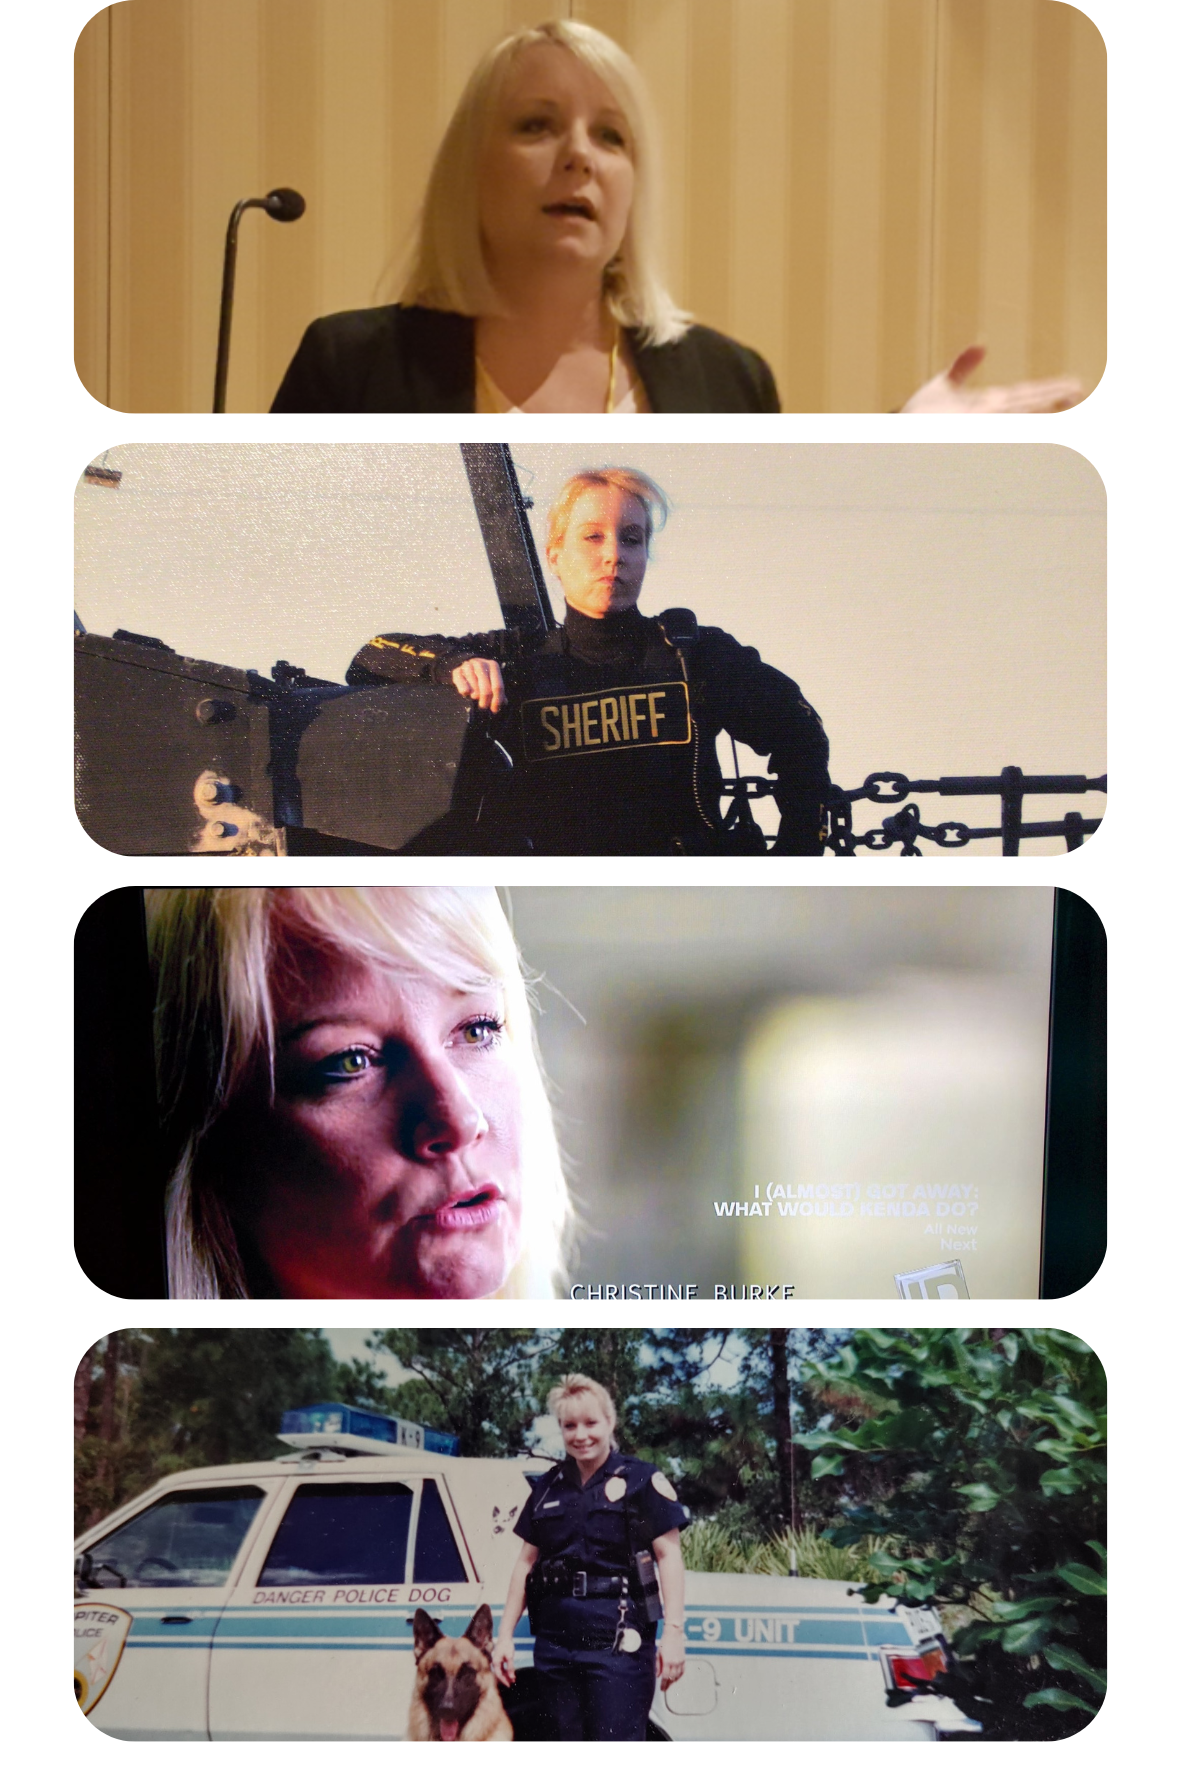 Pictures of christine burke in various career roles, police officer, television actor, speaker.